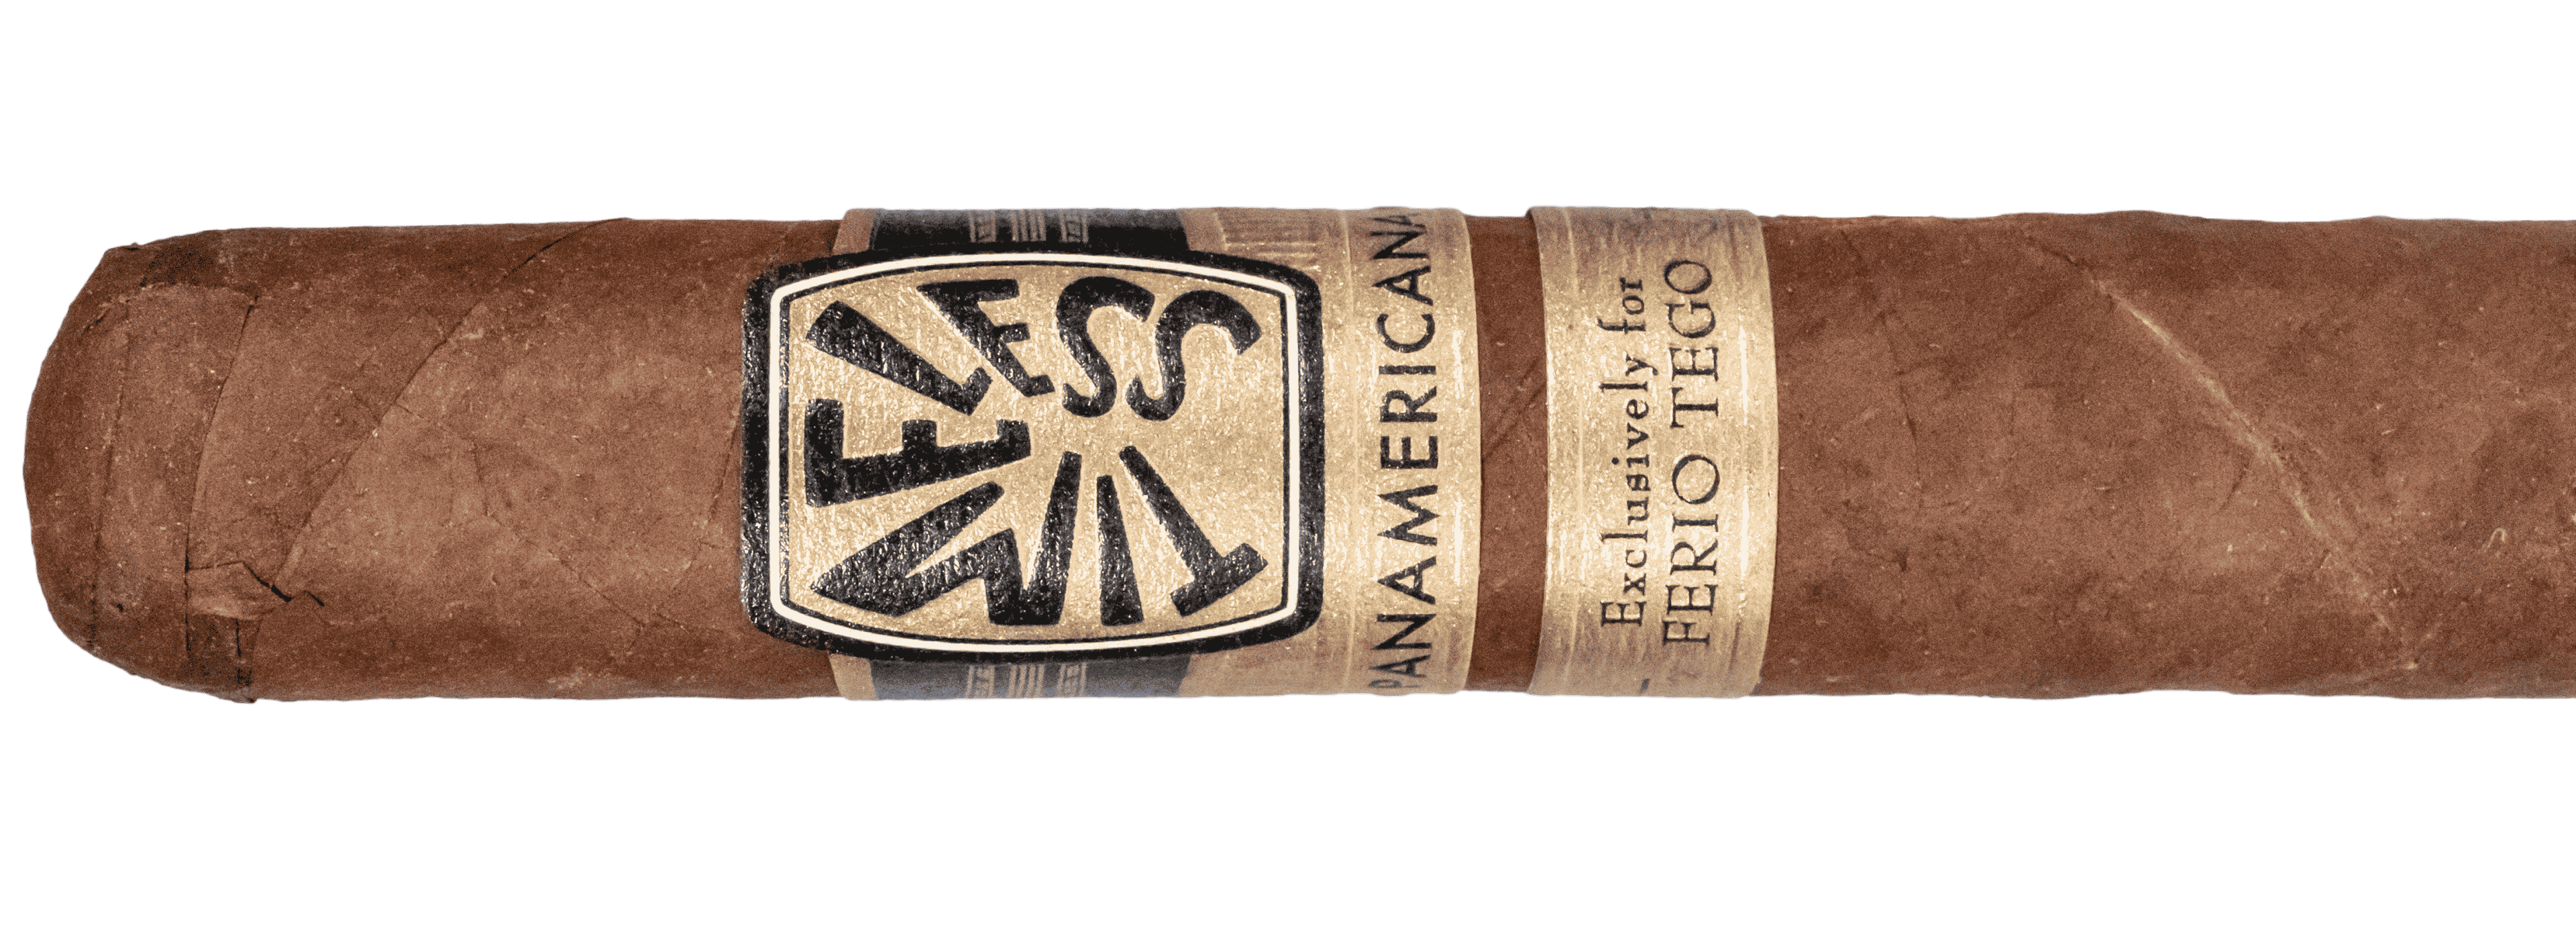 Ferio Tego Timeless Panamericana Epicure - Blind Cigar Review